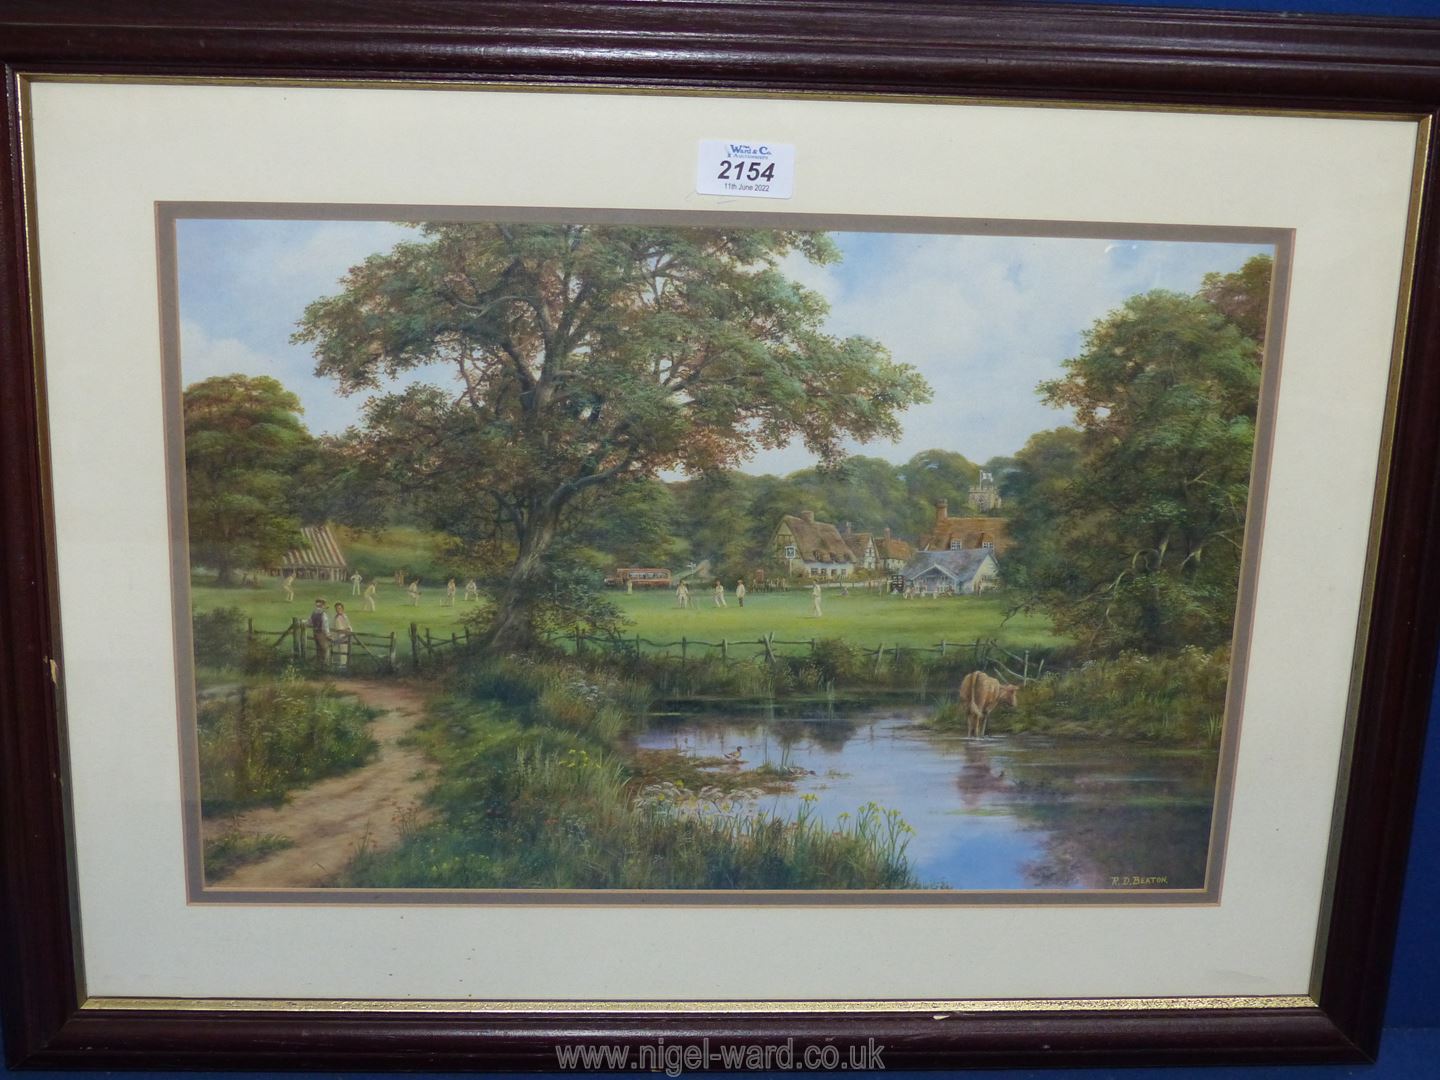 A framed and mounted Ron Beaton Print titled 'Willow and Thatch' 24 3/4" x 18 1/2".